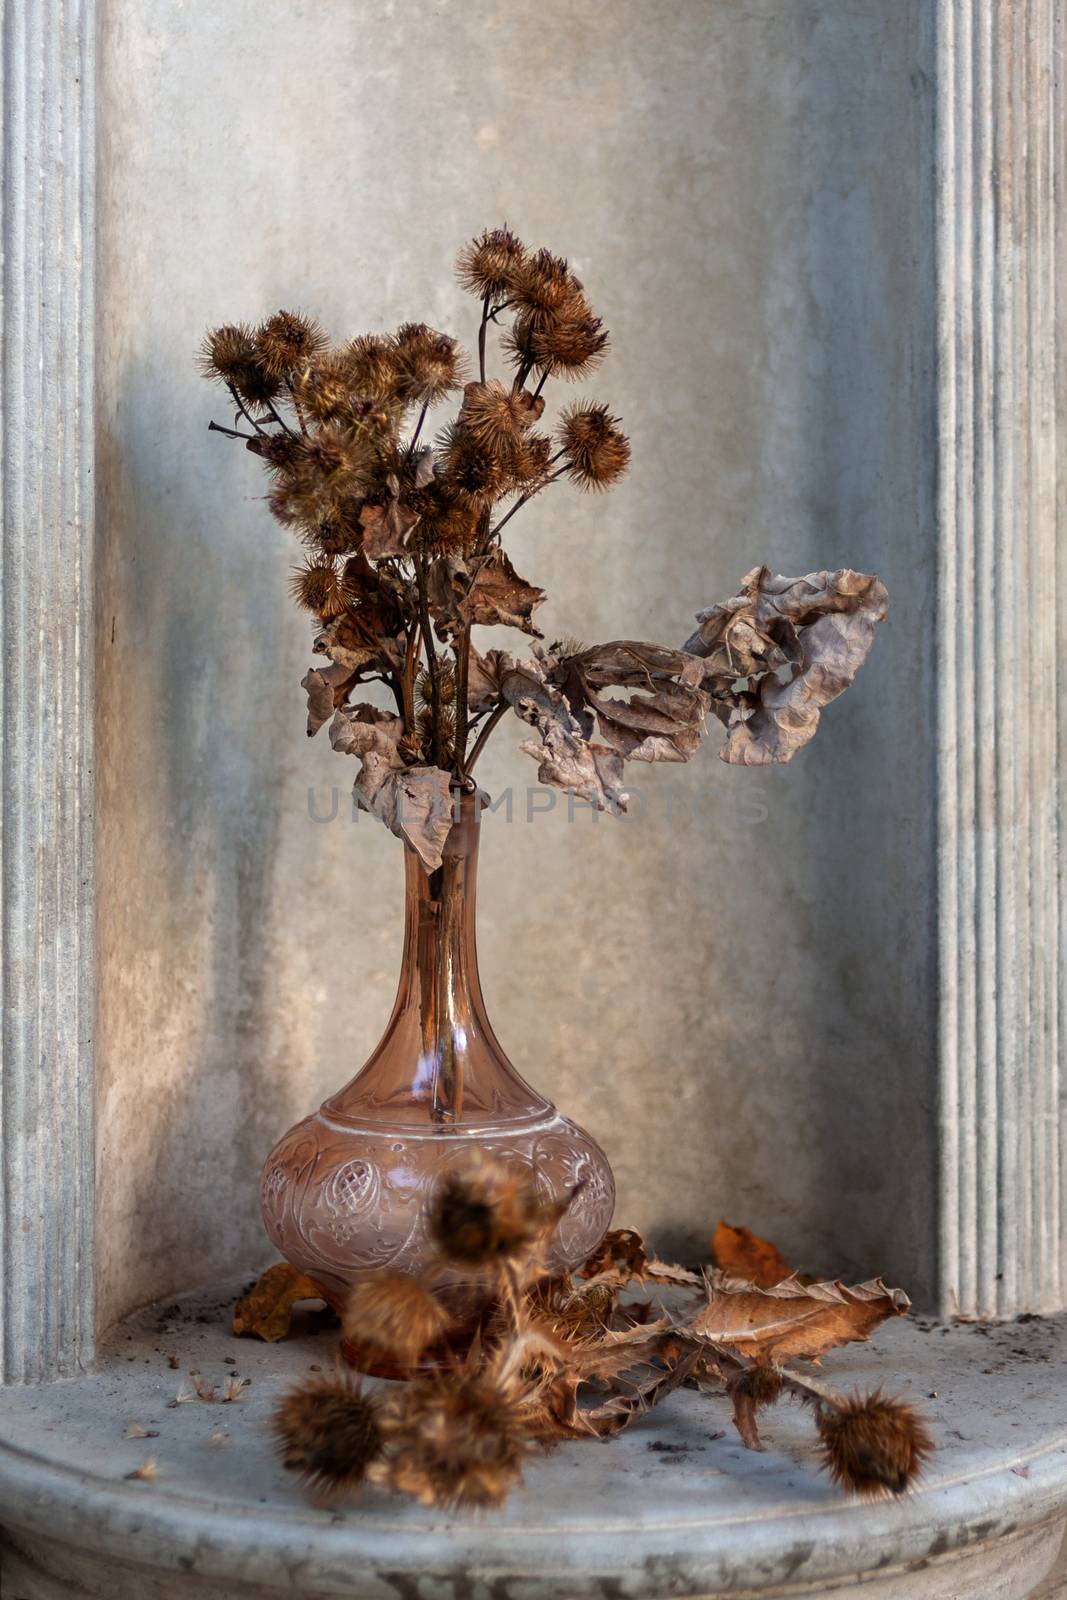 Dry burdock in a glass decanter.